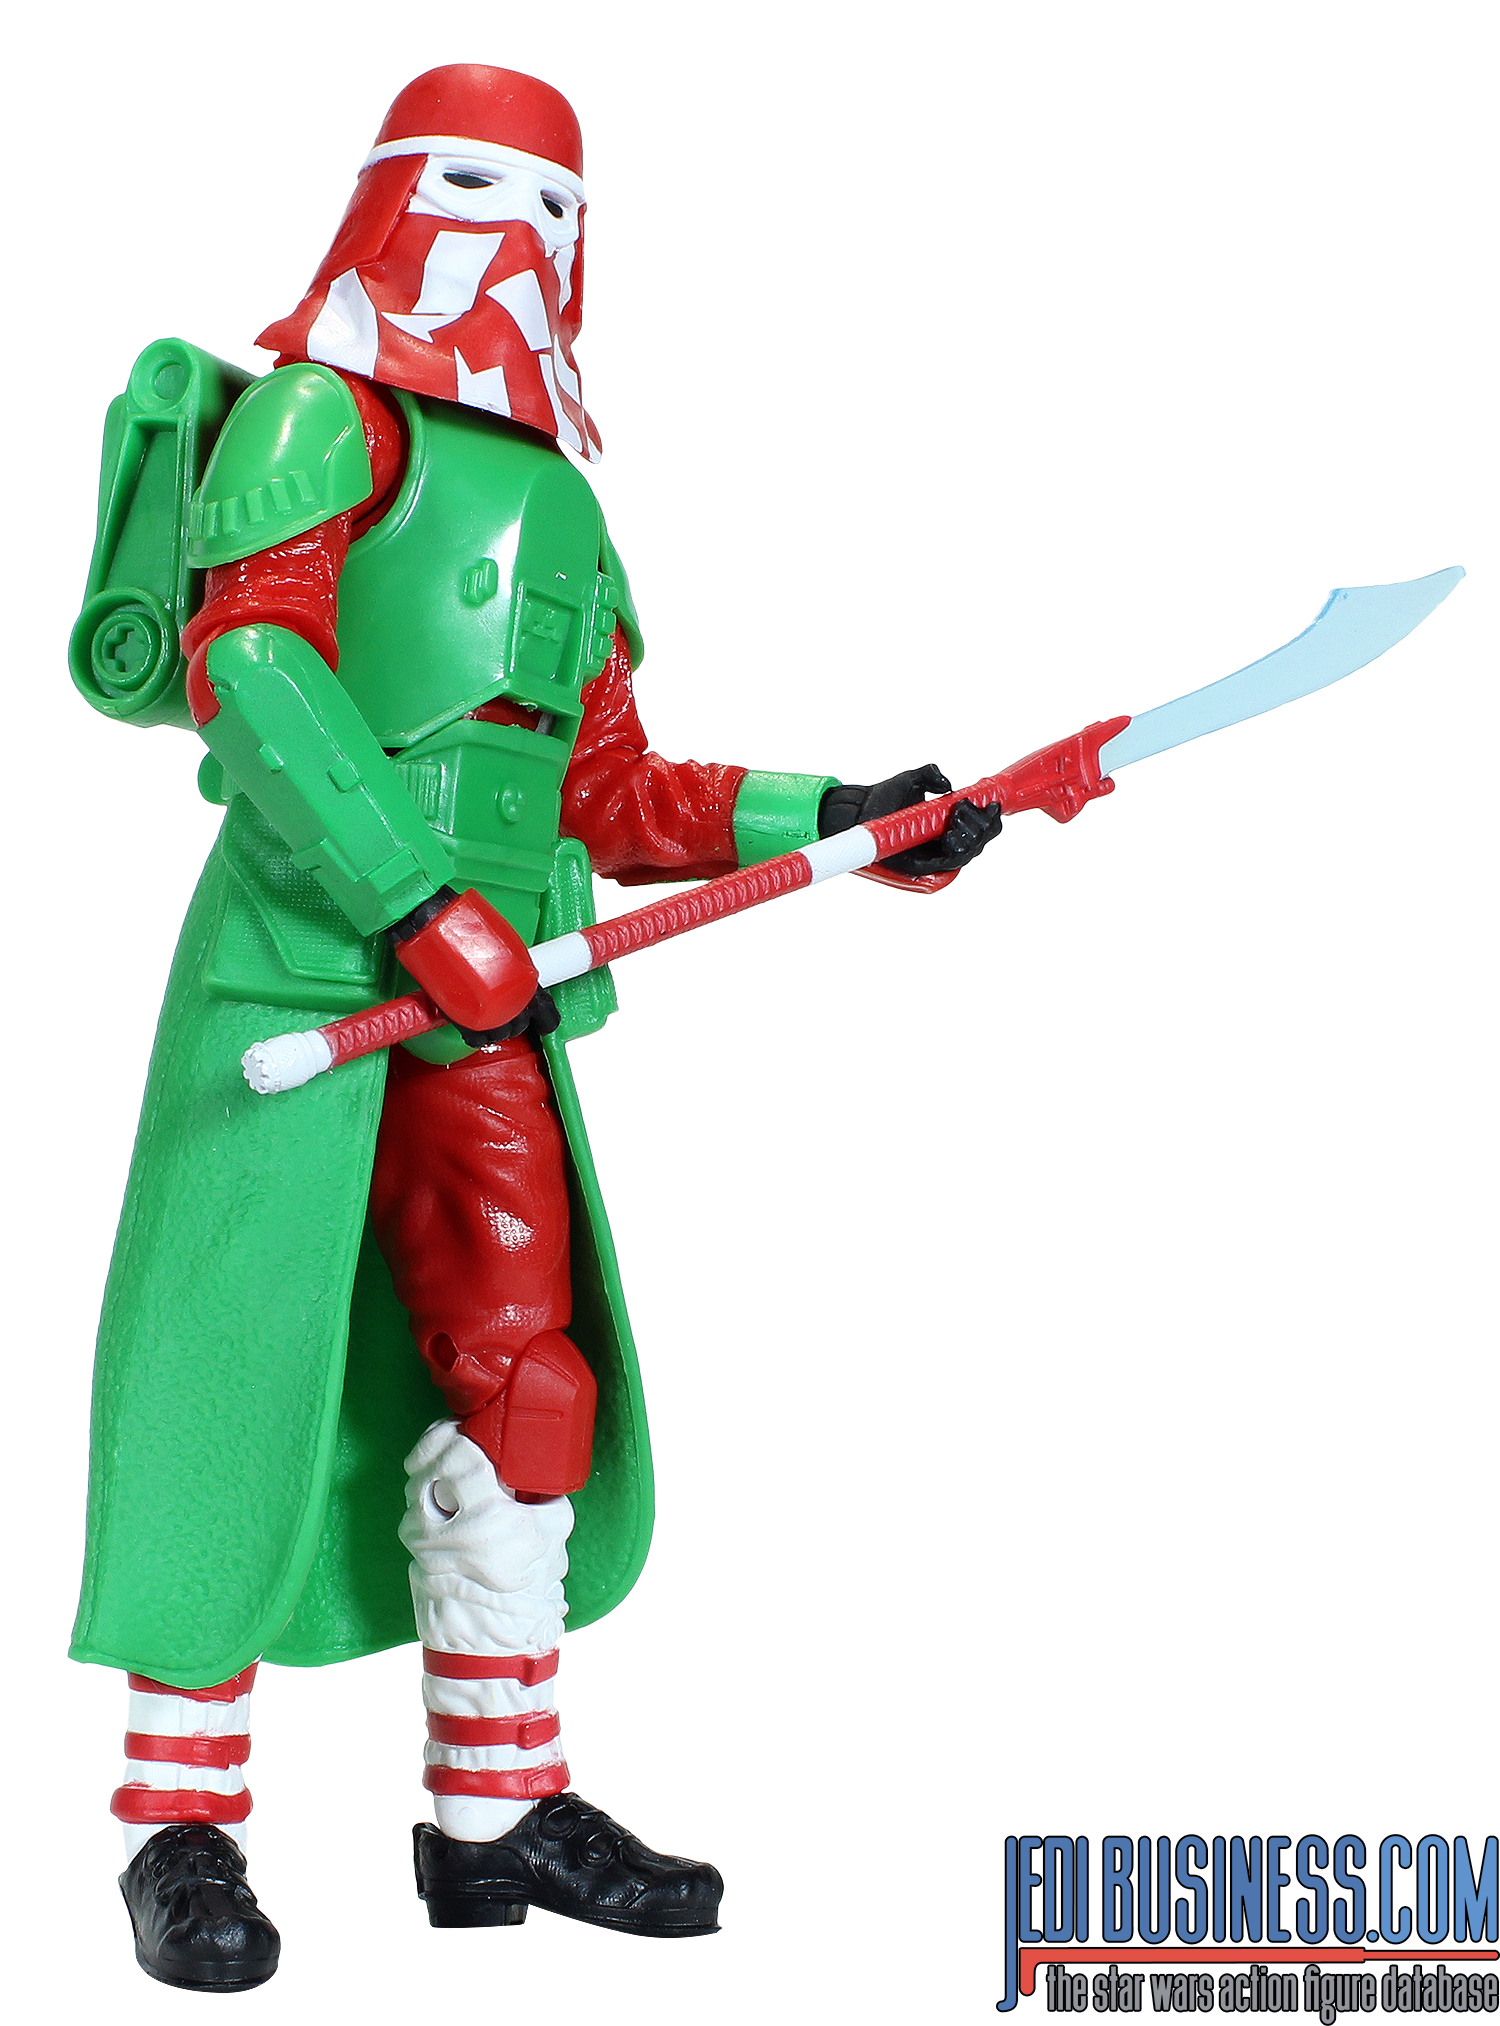 Snowtrooper 2020 Holiday Edition 2-Pack #3 of 5